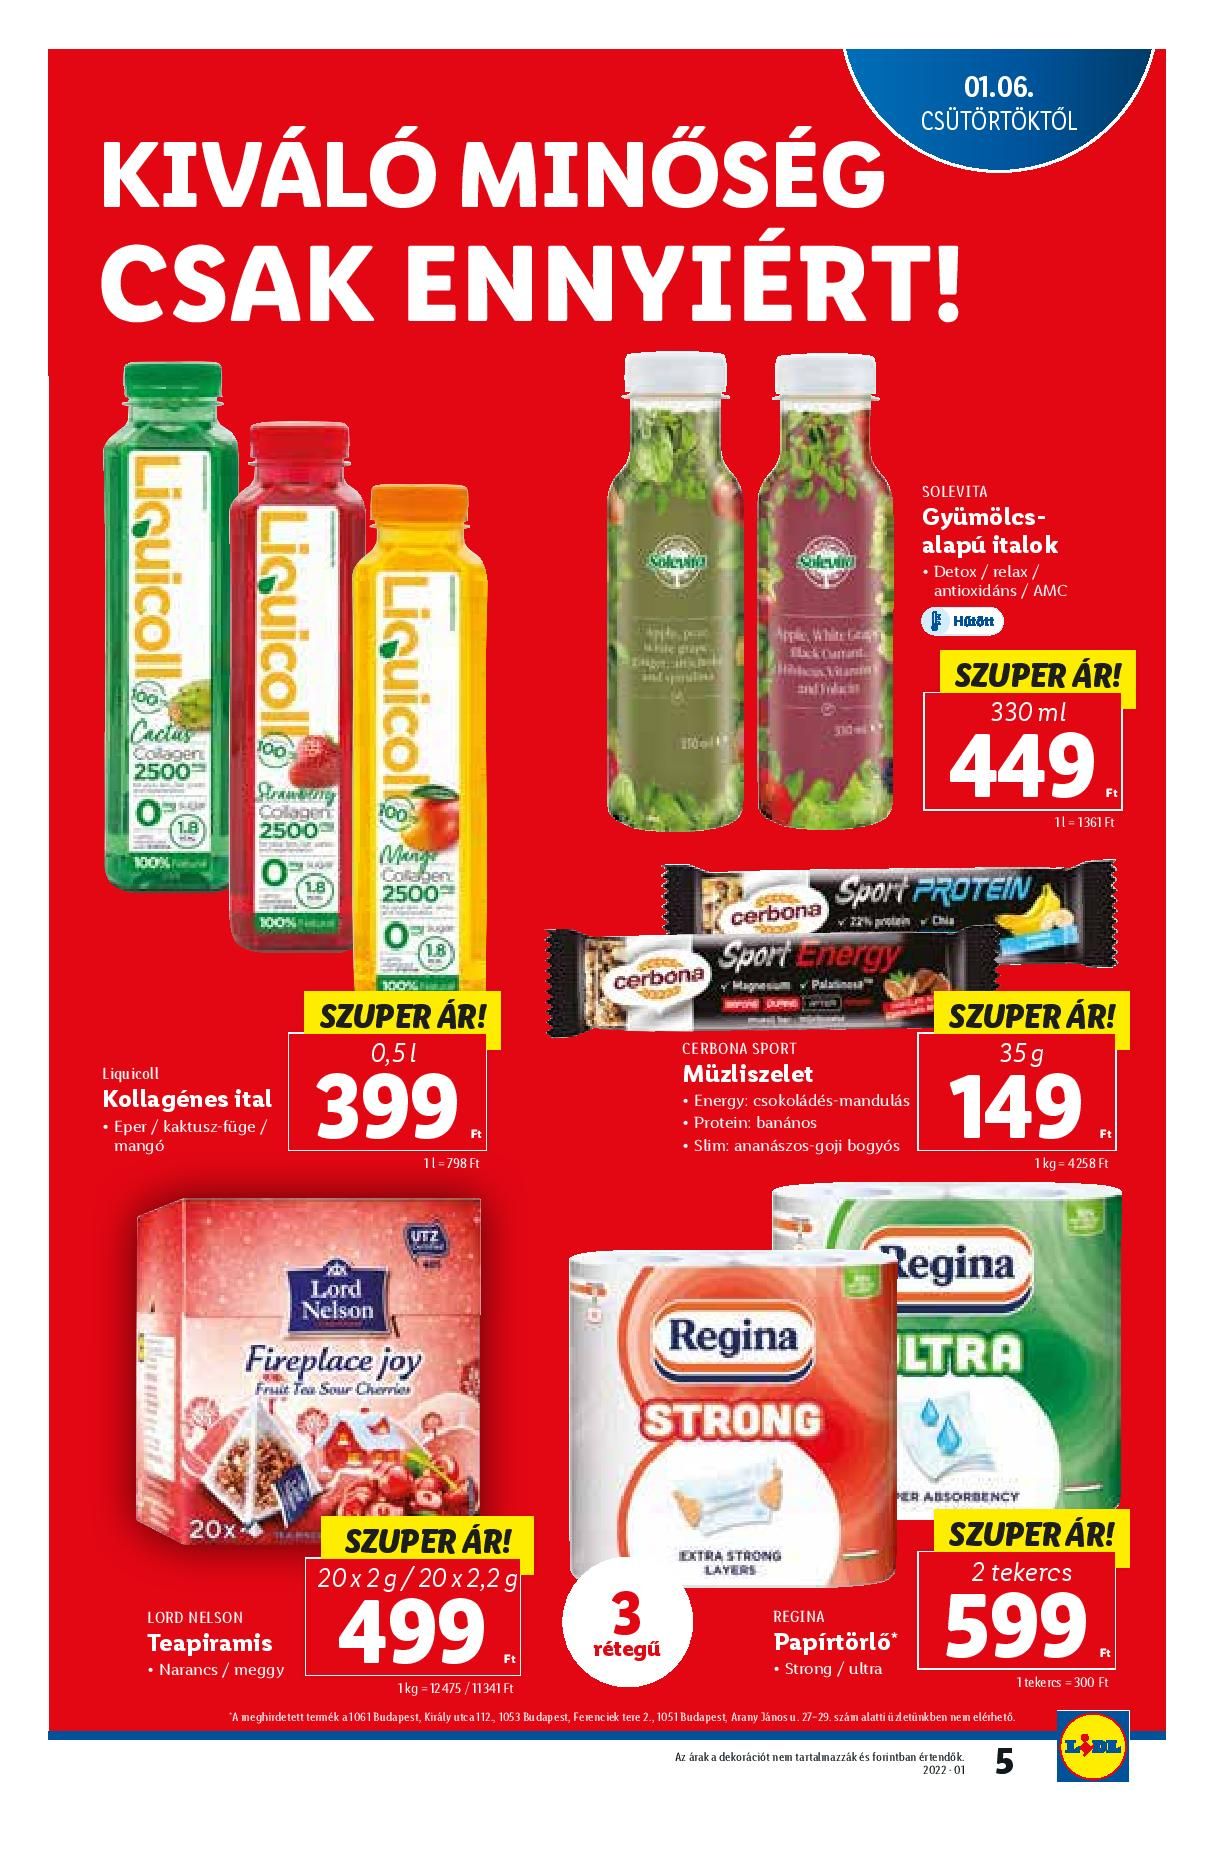 lidl0106-page-005